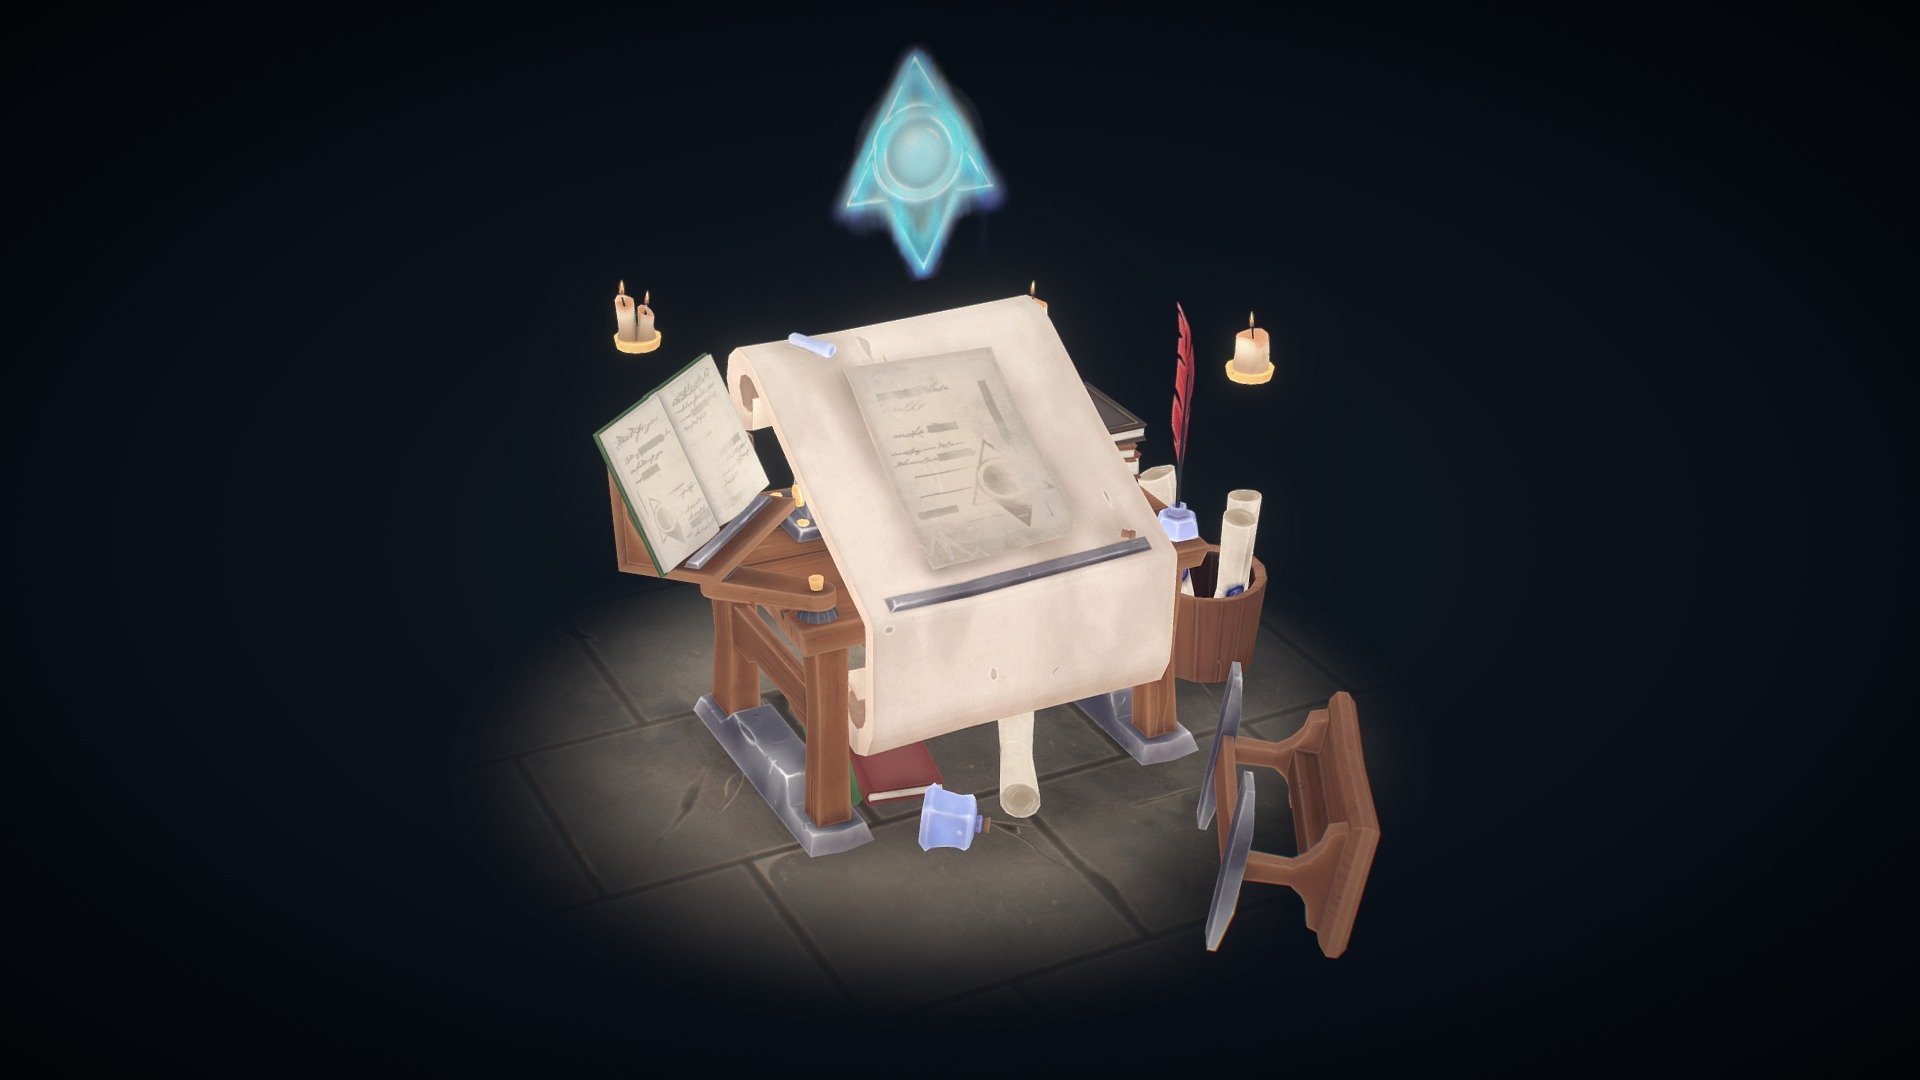 A little handpainted fantasy spellbound desk prop setup made in Maya, Substance Painter &amp; Photoshop (and a little bit of 3DCoat).

I wanted to do something that was somewhere between My Time at Portia and World of Warcraft.

Based on my own concepts &amp; sketches.

You can check out more here - 
https://www.artstation.com/artwork/3qBnK2 - Spellbound Desk - 3D model by rp3d_ 3d model